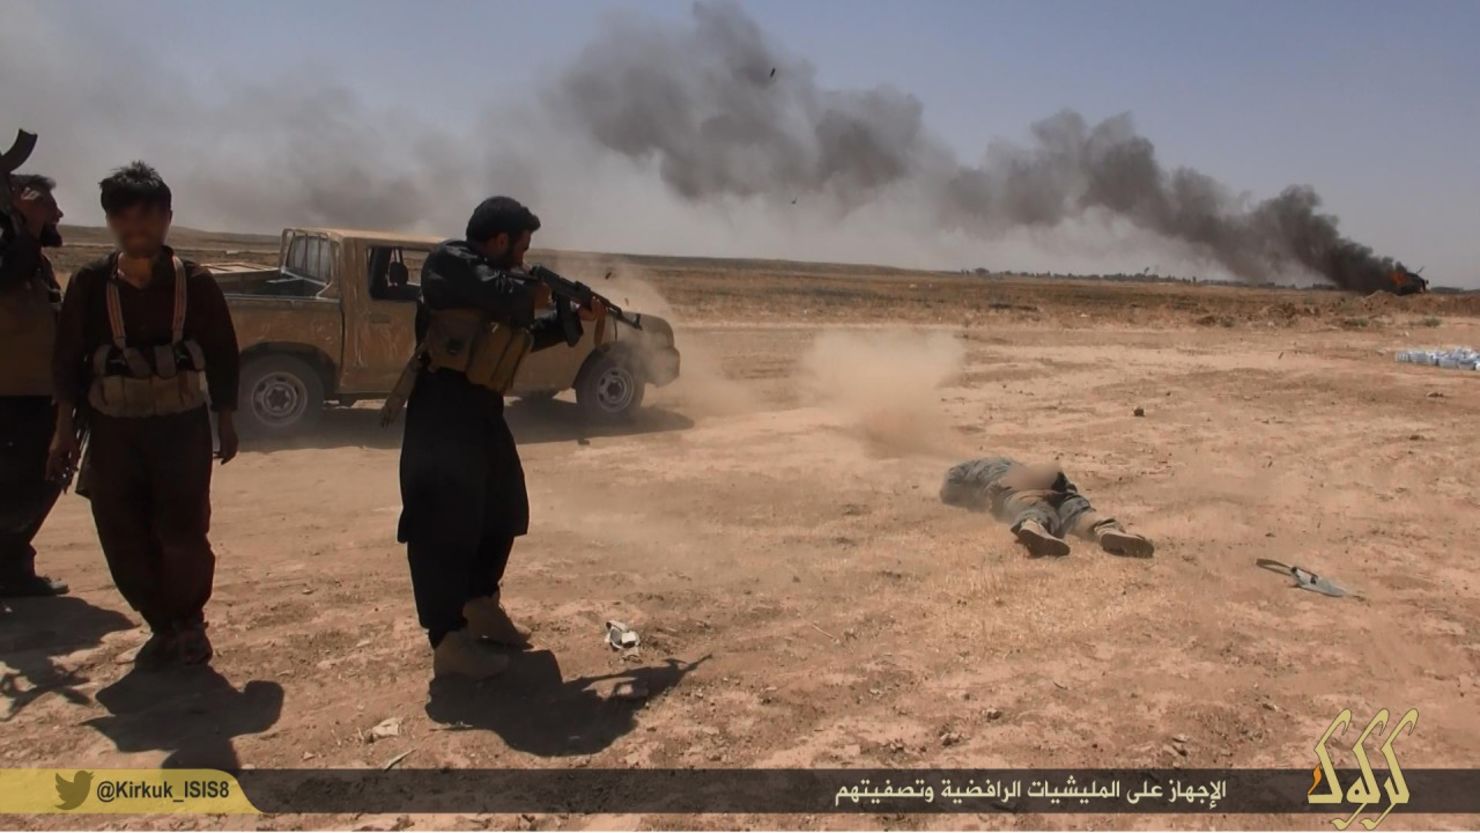 ISIS fighters have gained control over large parts of Iraq.